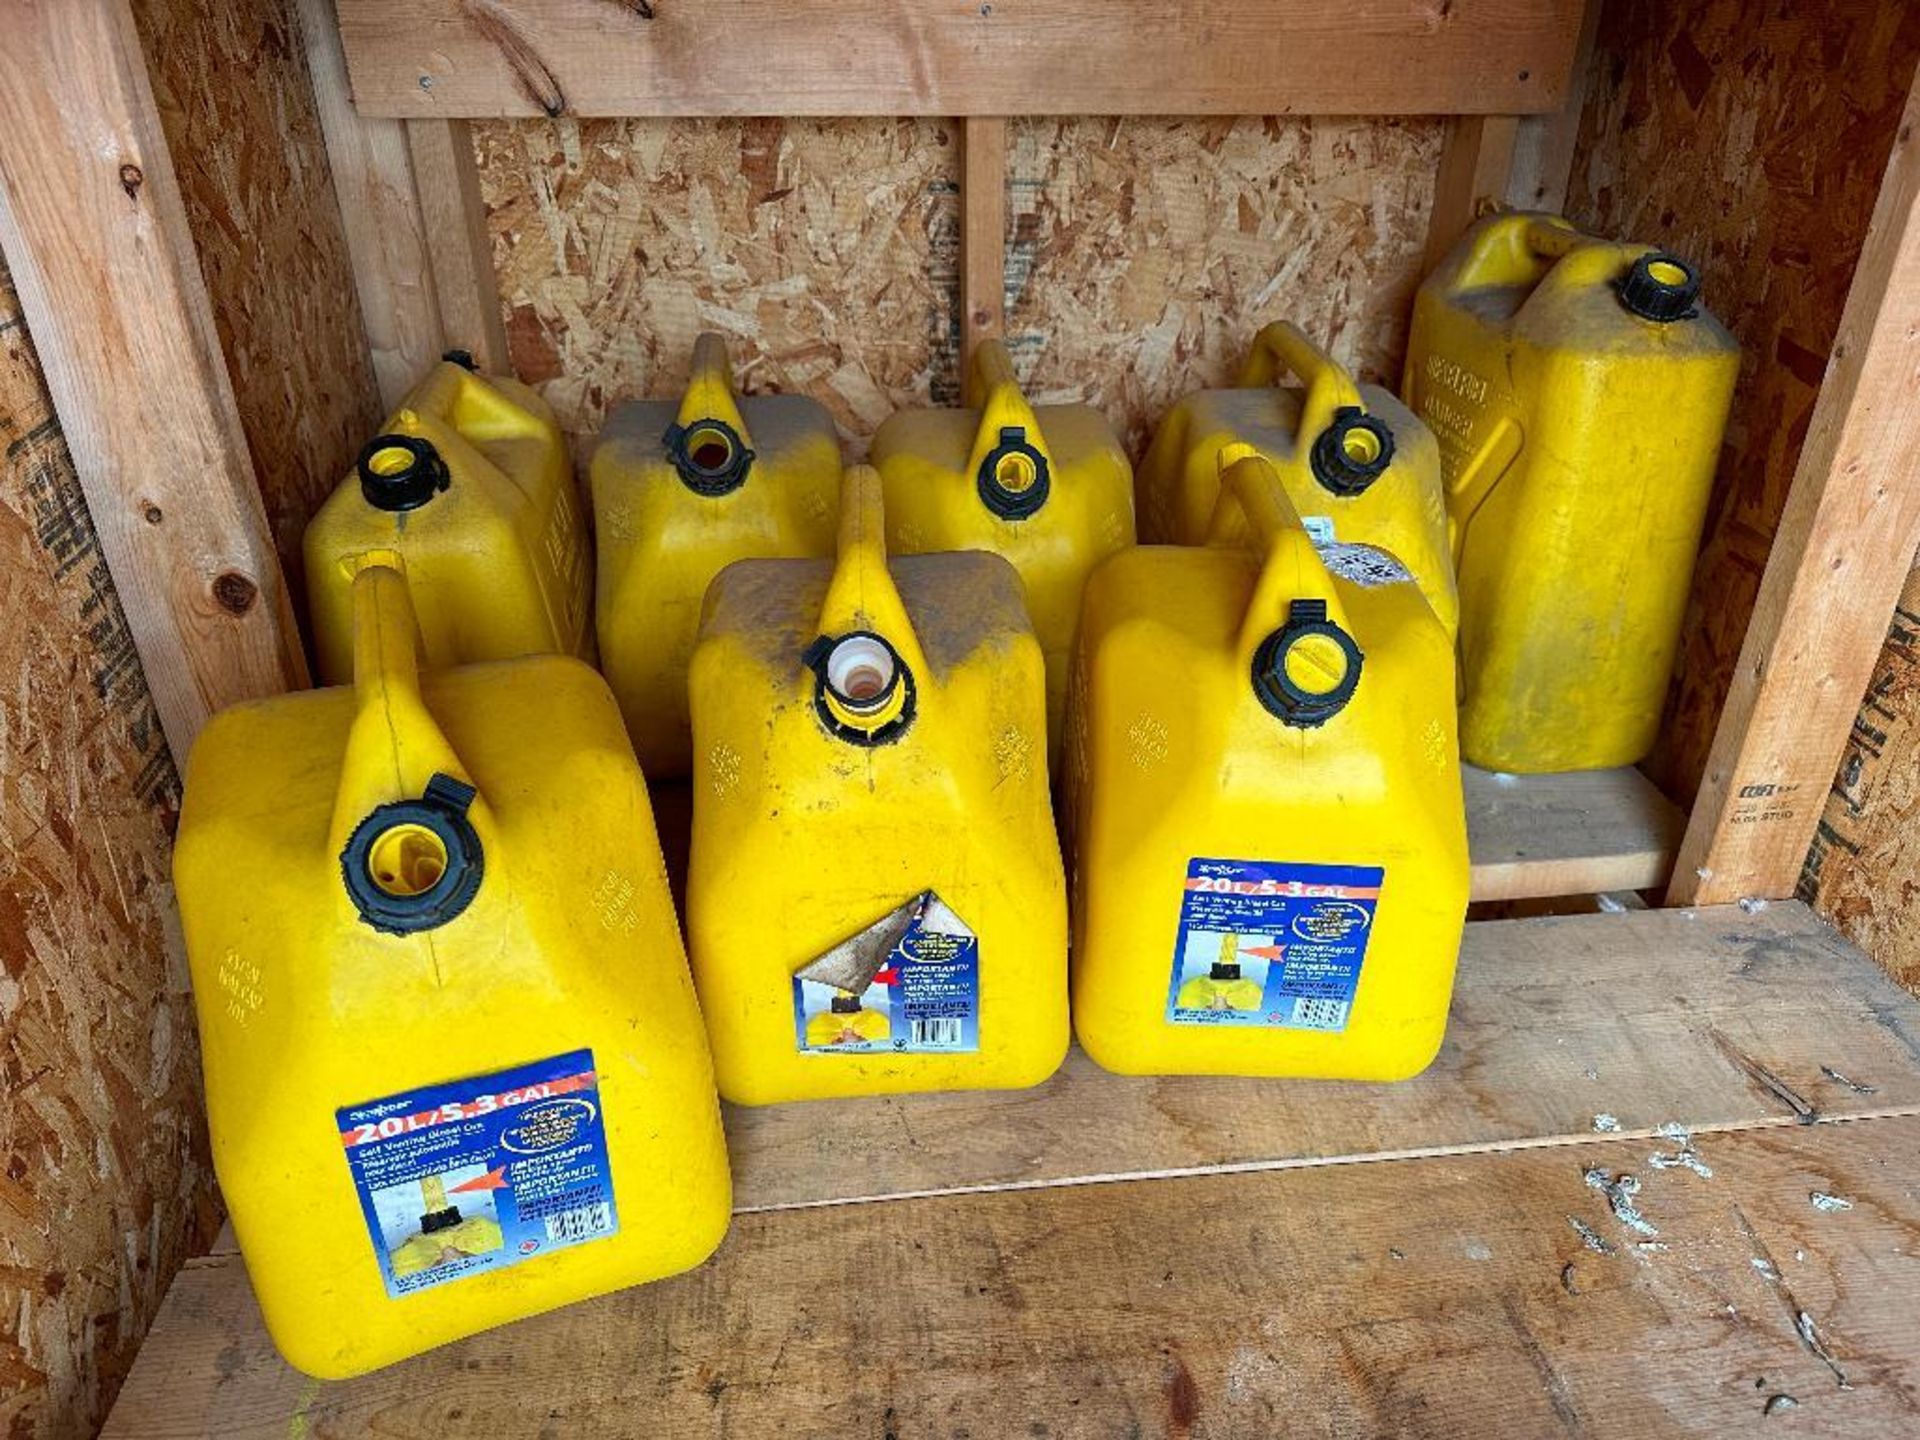 Lot of Asst. Jerry Fuel Cans - Image 3 of 3